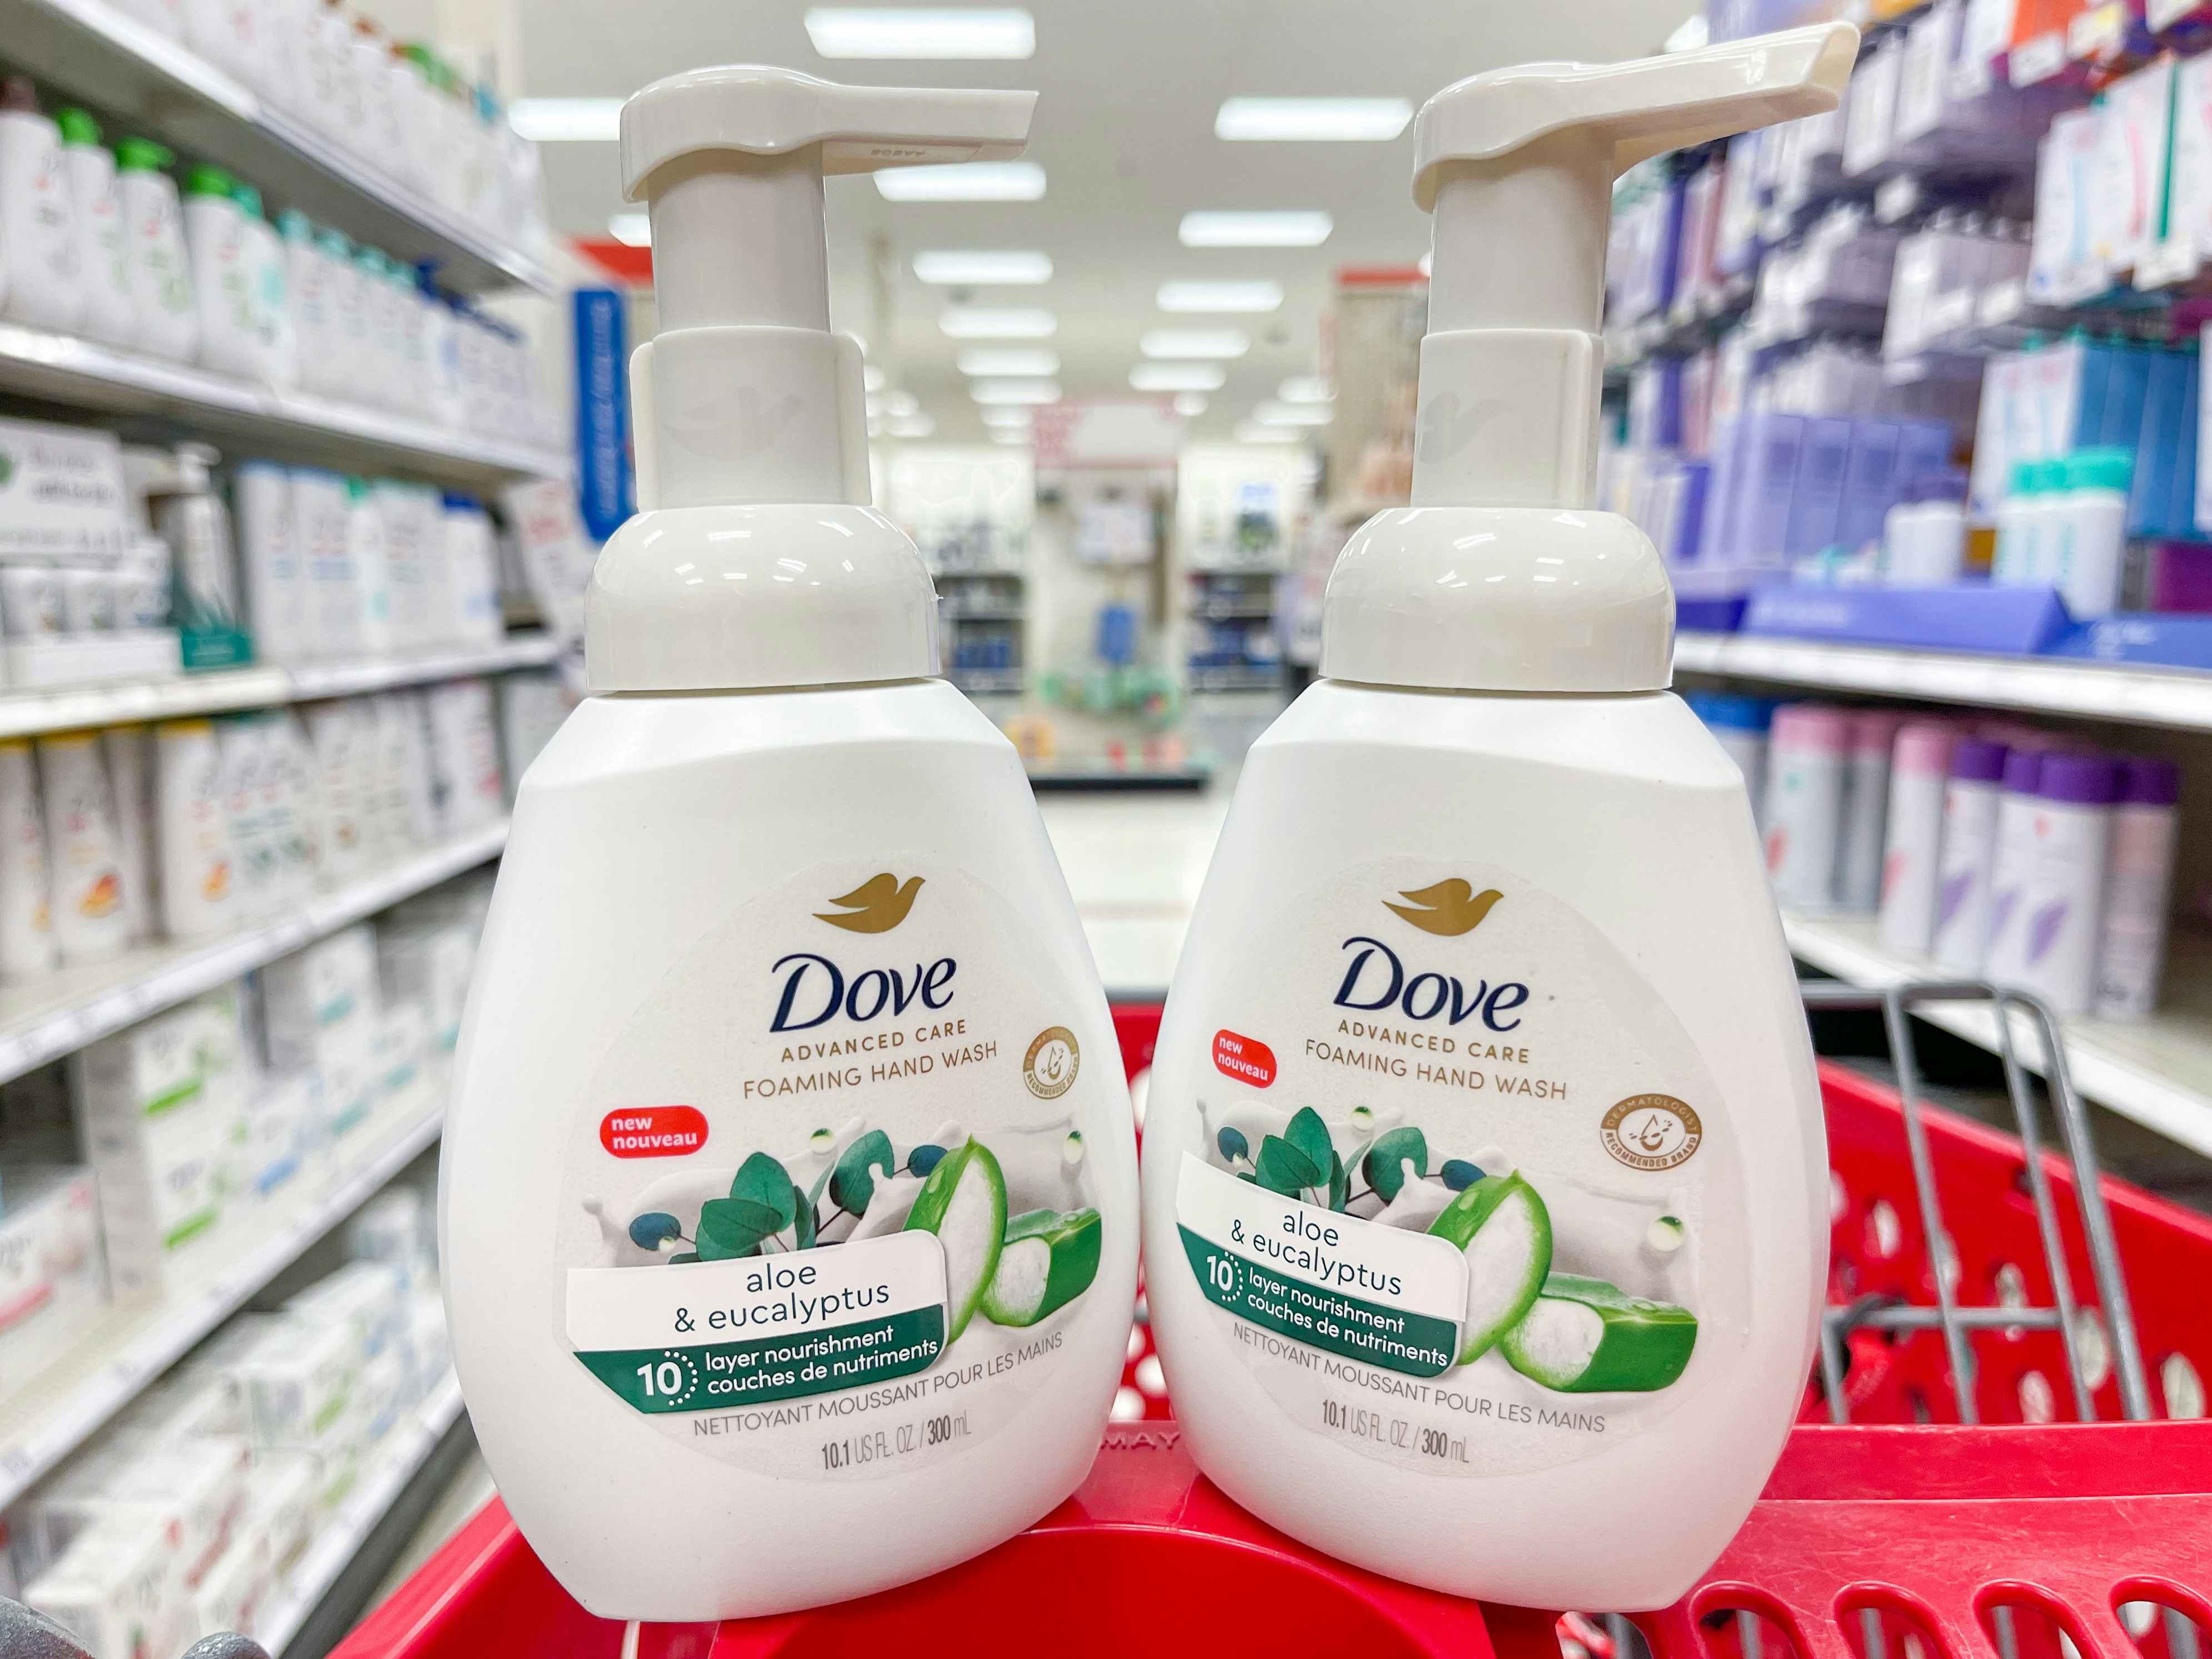 Dove Foaming Hand Wash 4-Pack, as Low as $6.98 on Amazon ($1.75 Each)